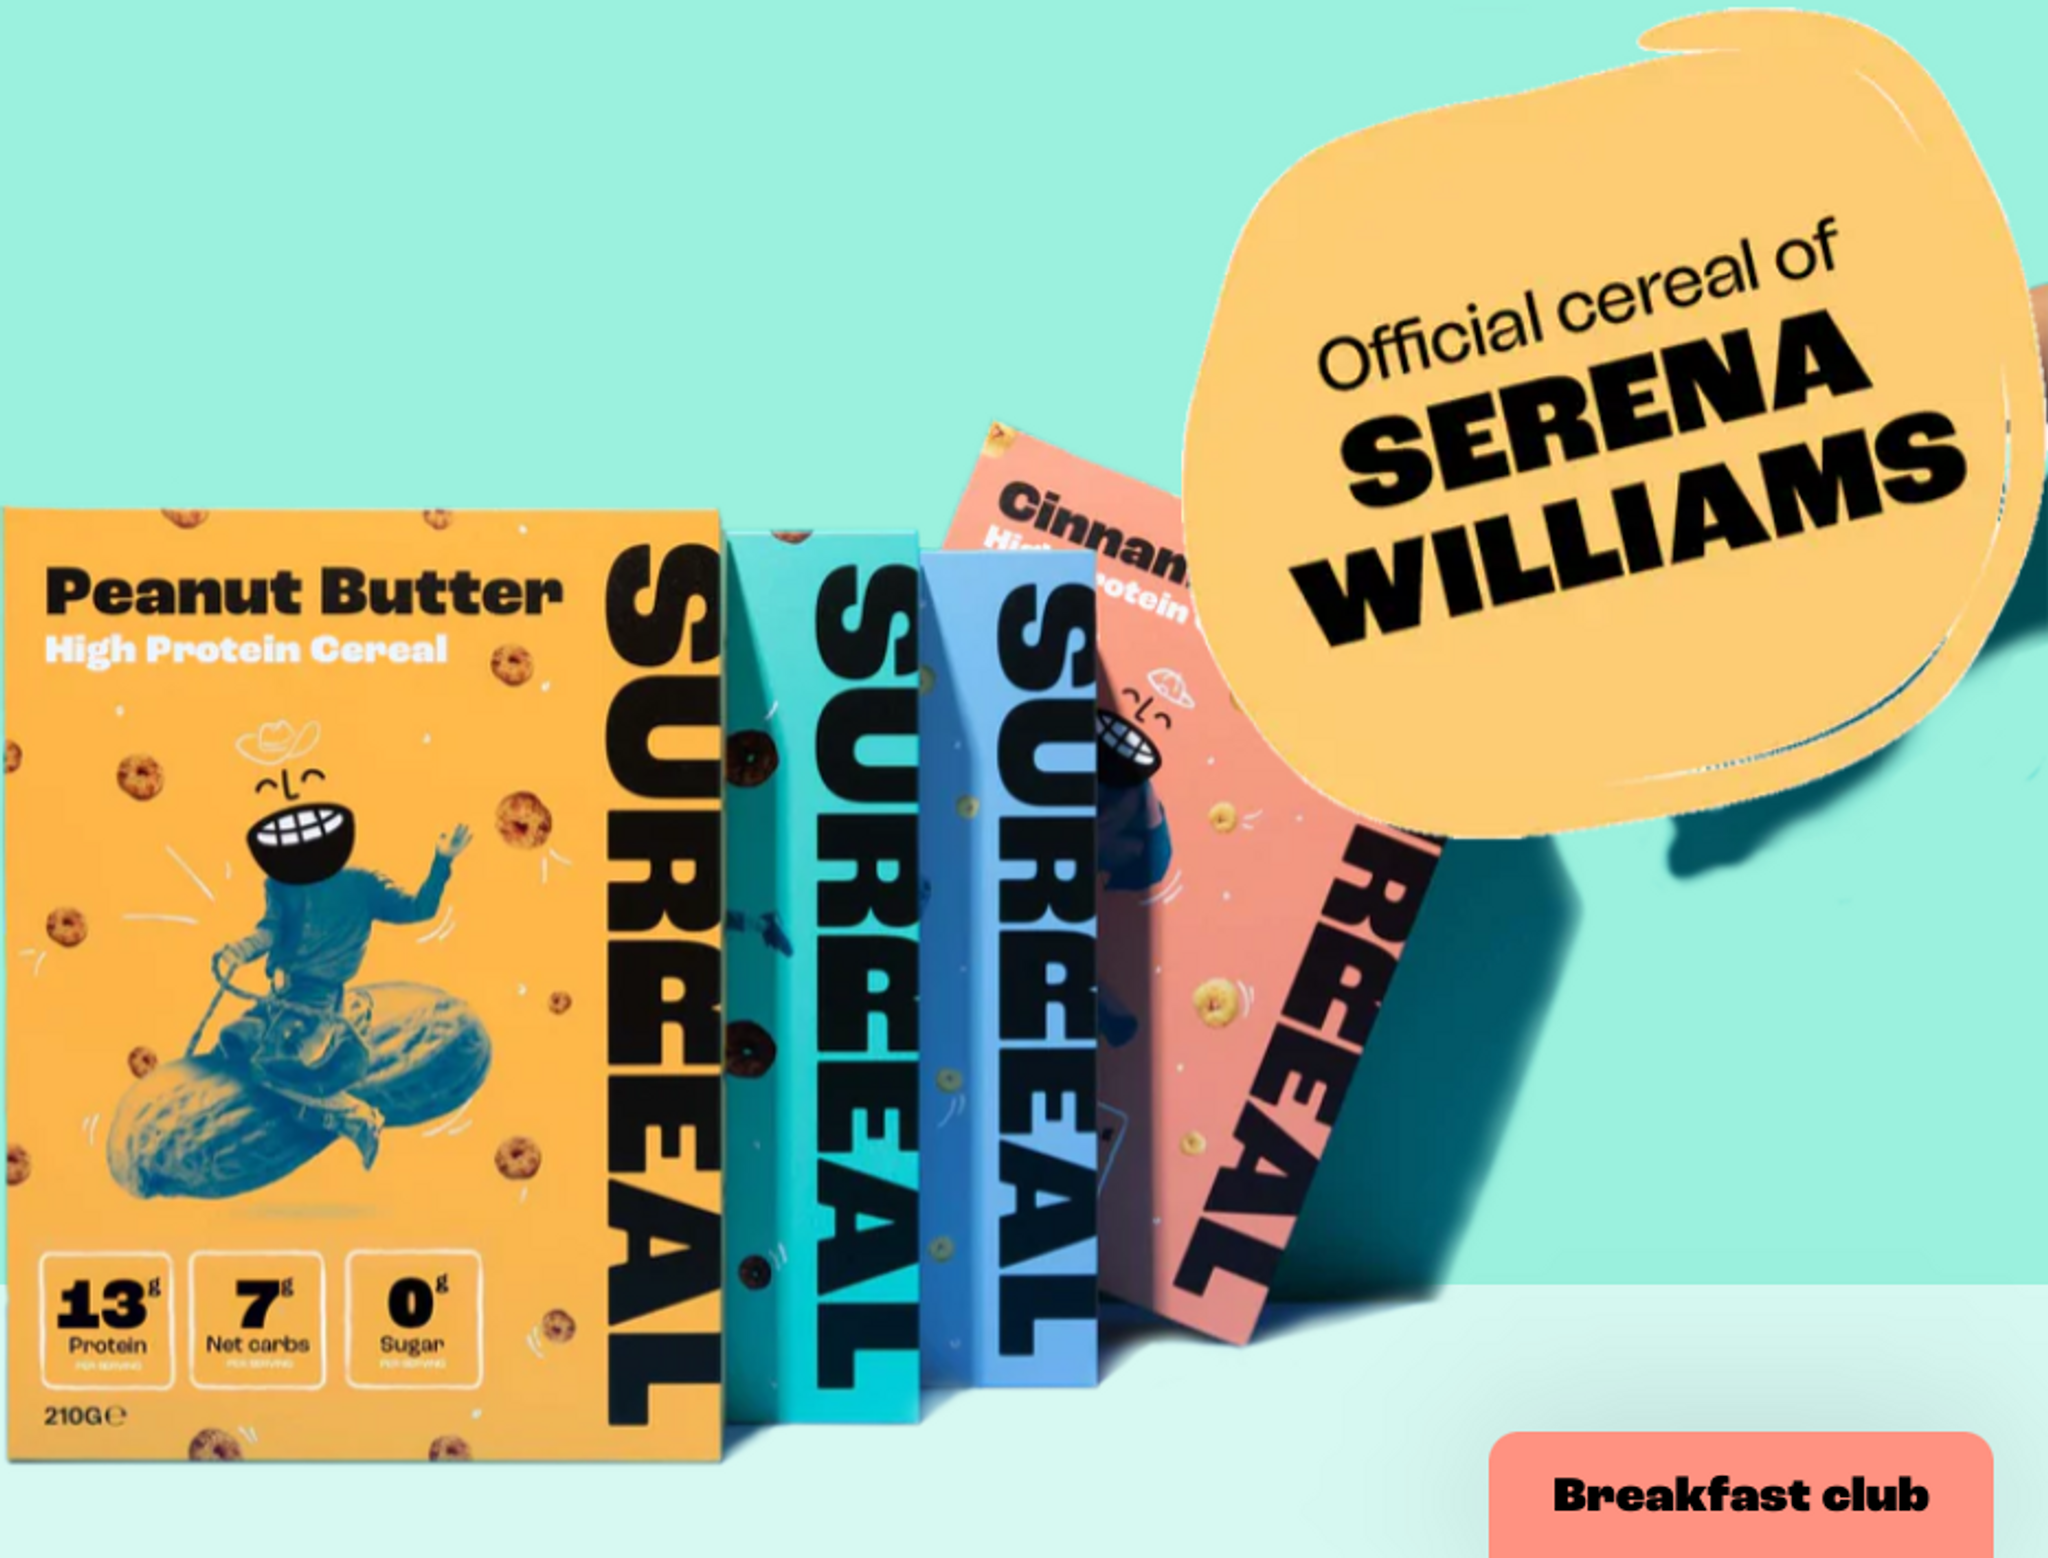 Surreal Cereal uses authentic marketing with fake celebs